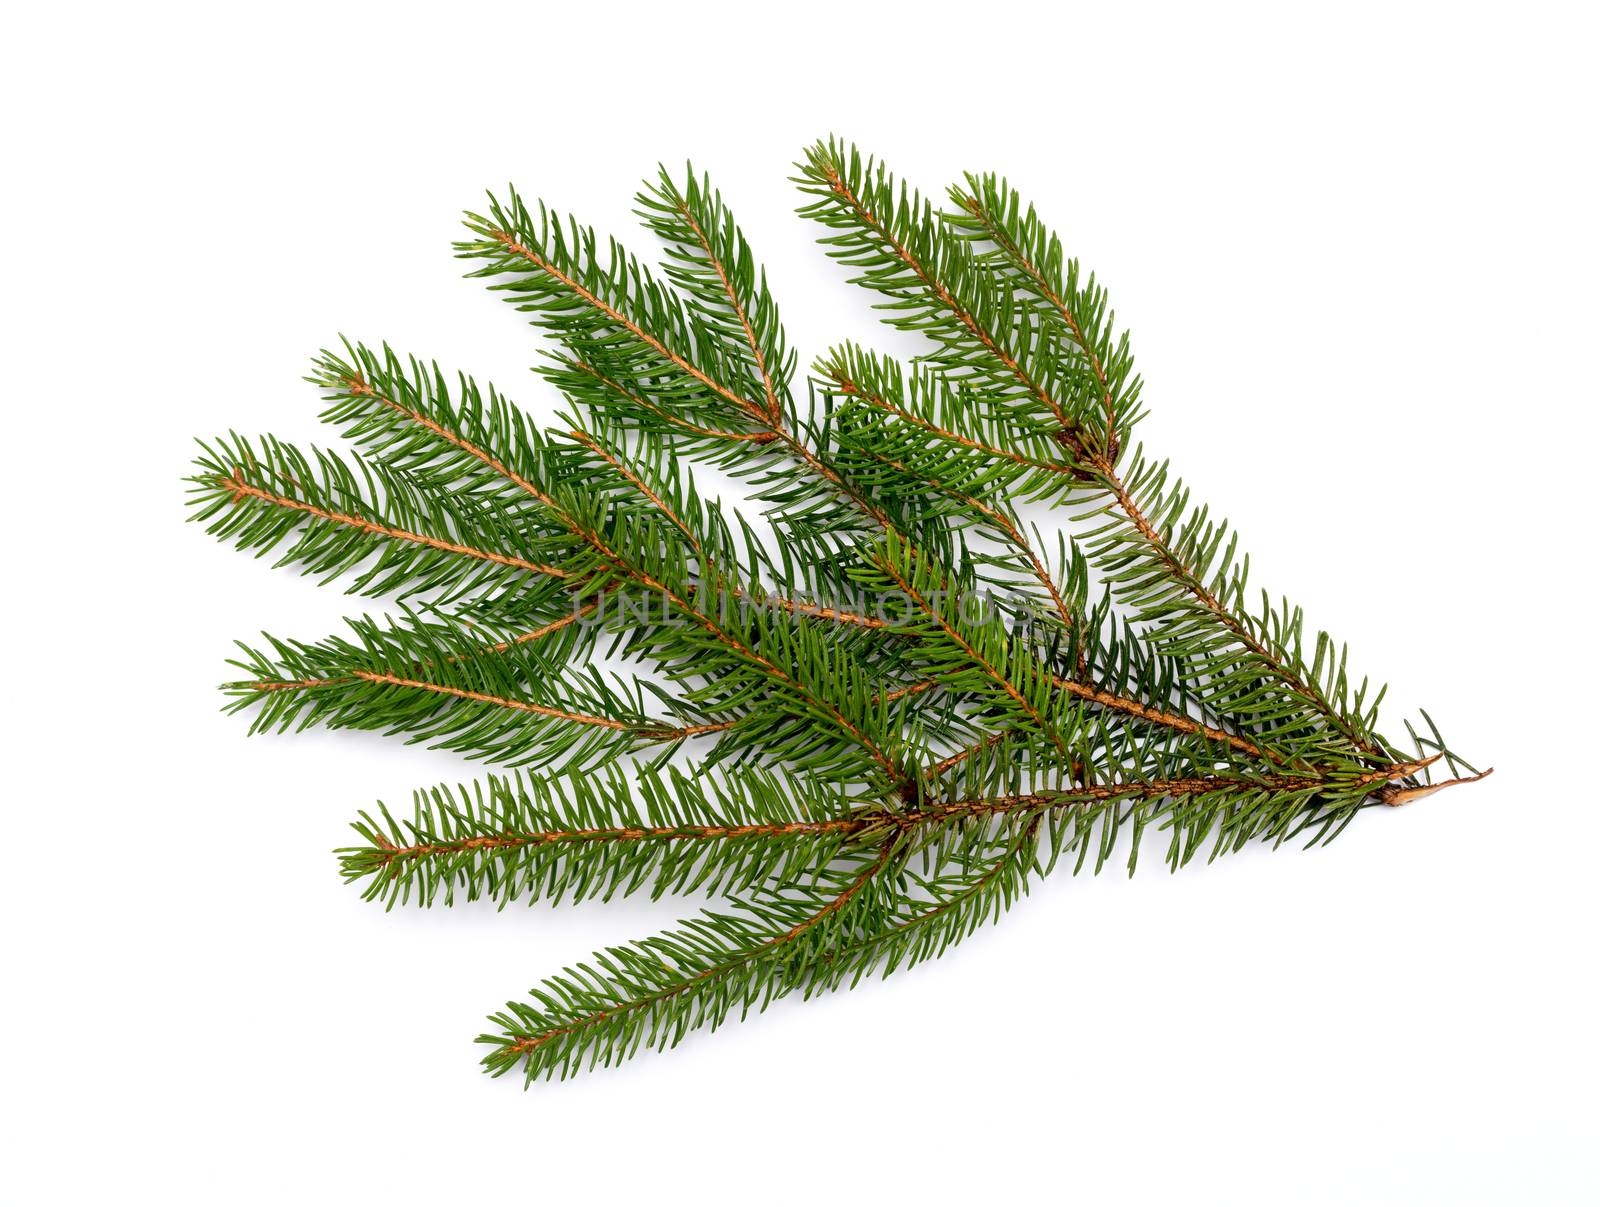 Fir branch isolated on white background by DNKSTUDIO